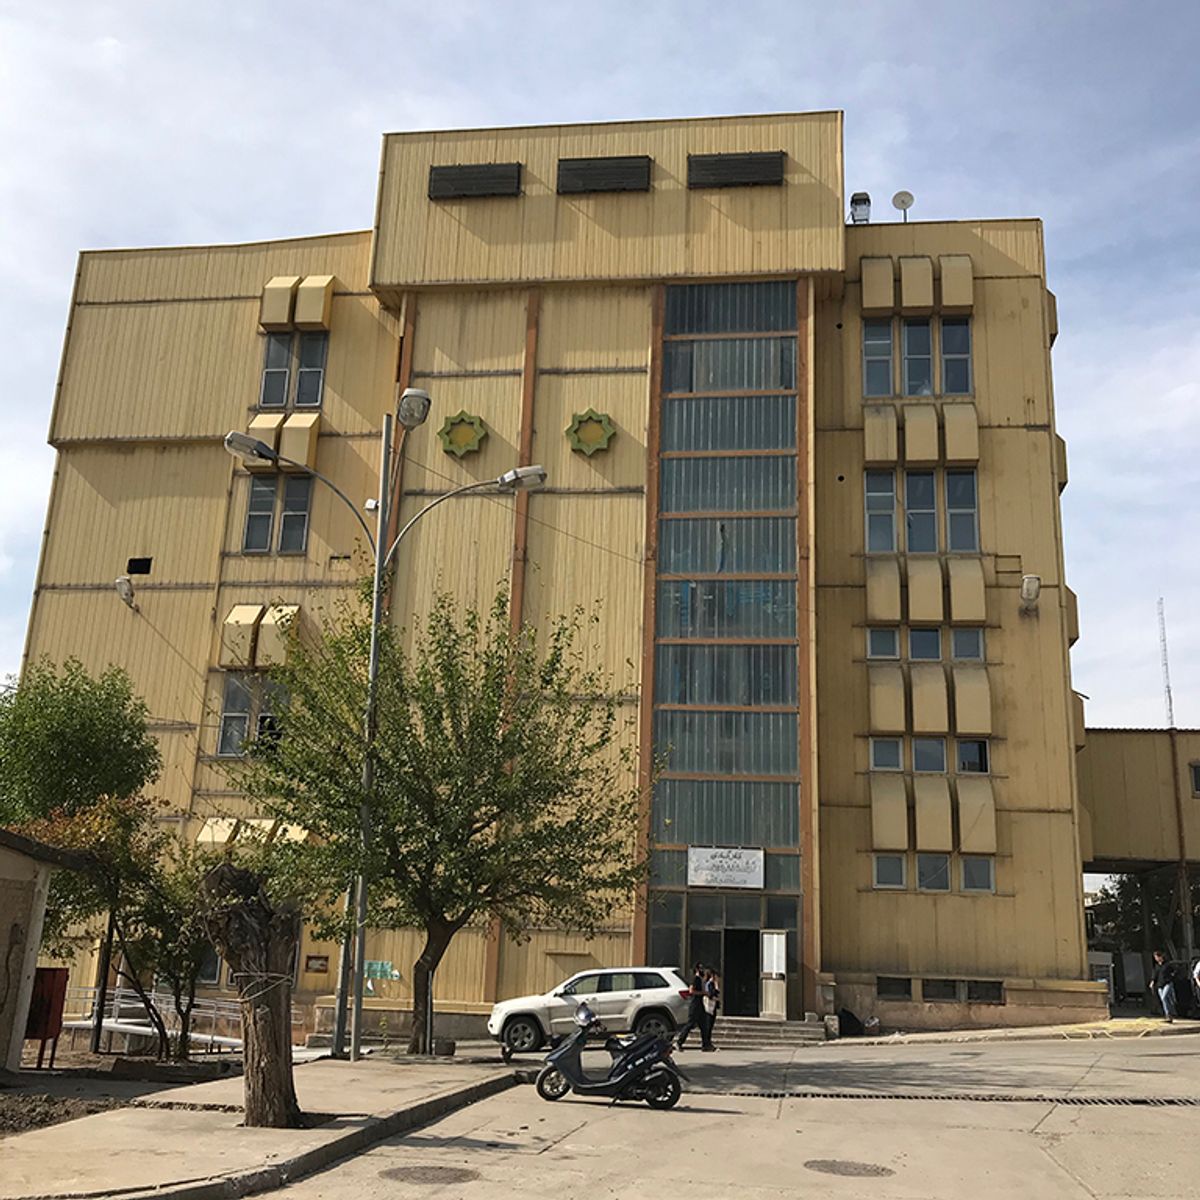 A former tobacco factory reincarnated as the Culture Factory in Sulaymaniyah Sabrina Wirth